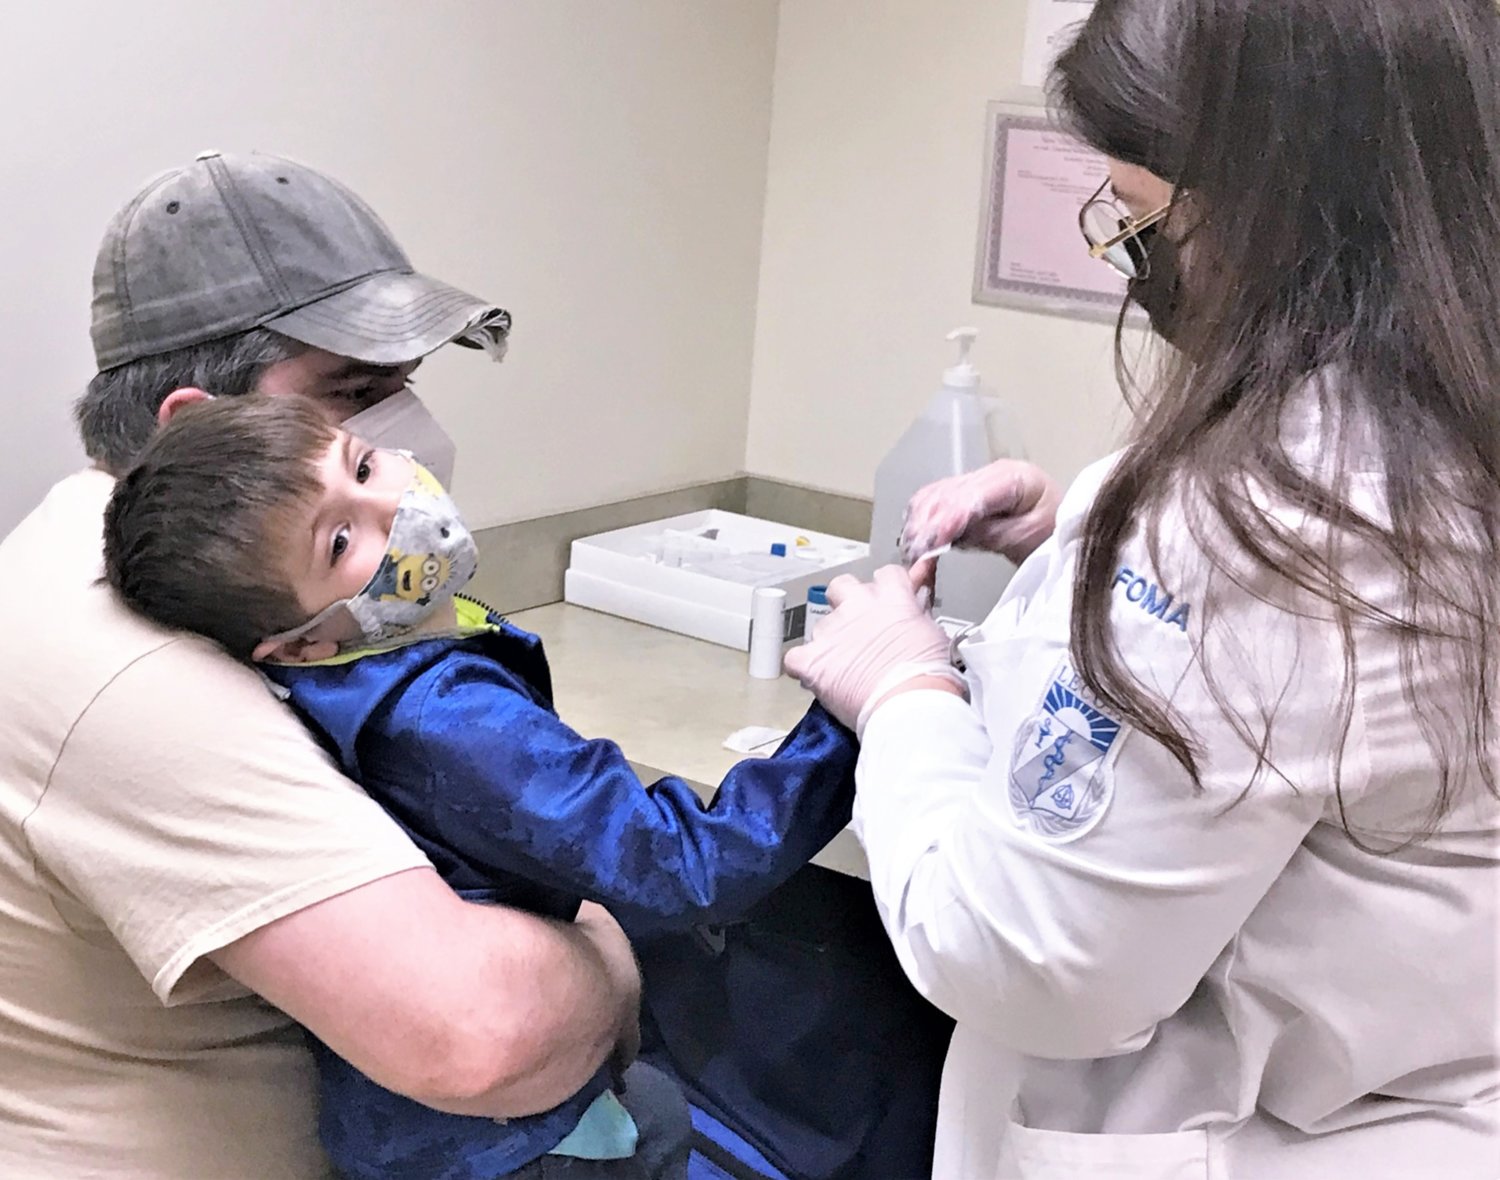 Lake Erie College of Medicine student Valerie Fiore performs a free lead screening on Lincoln Malloy, 5, at the Economic Opportunity Office in Elmira while his father Steven Malloy, of Horseheads, looks on.